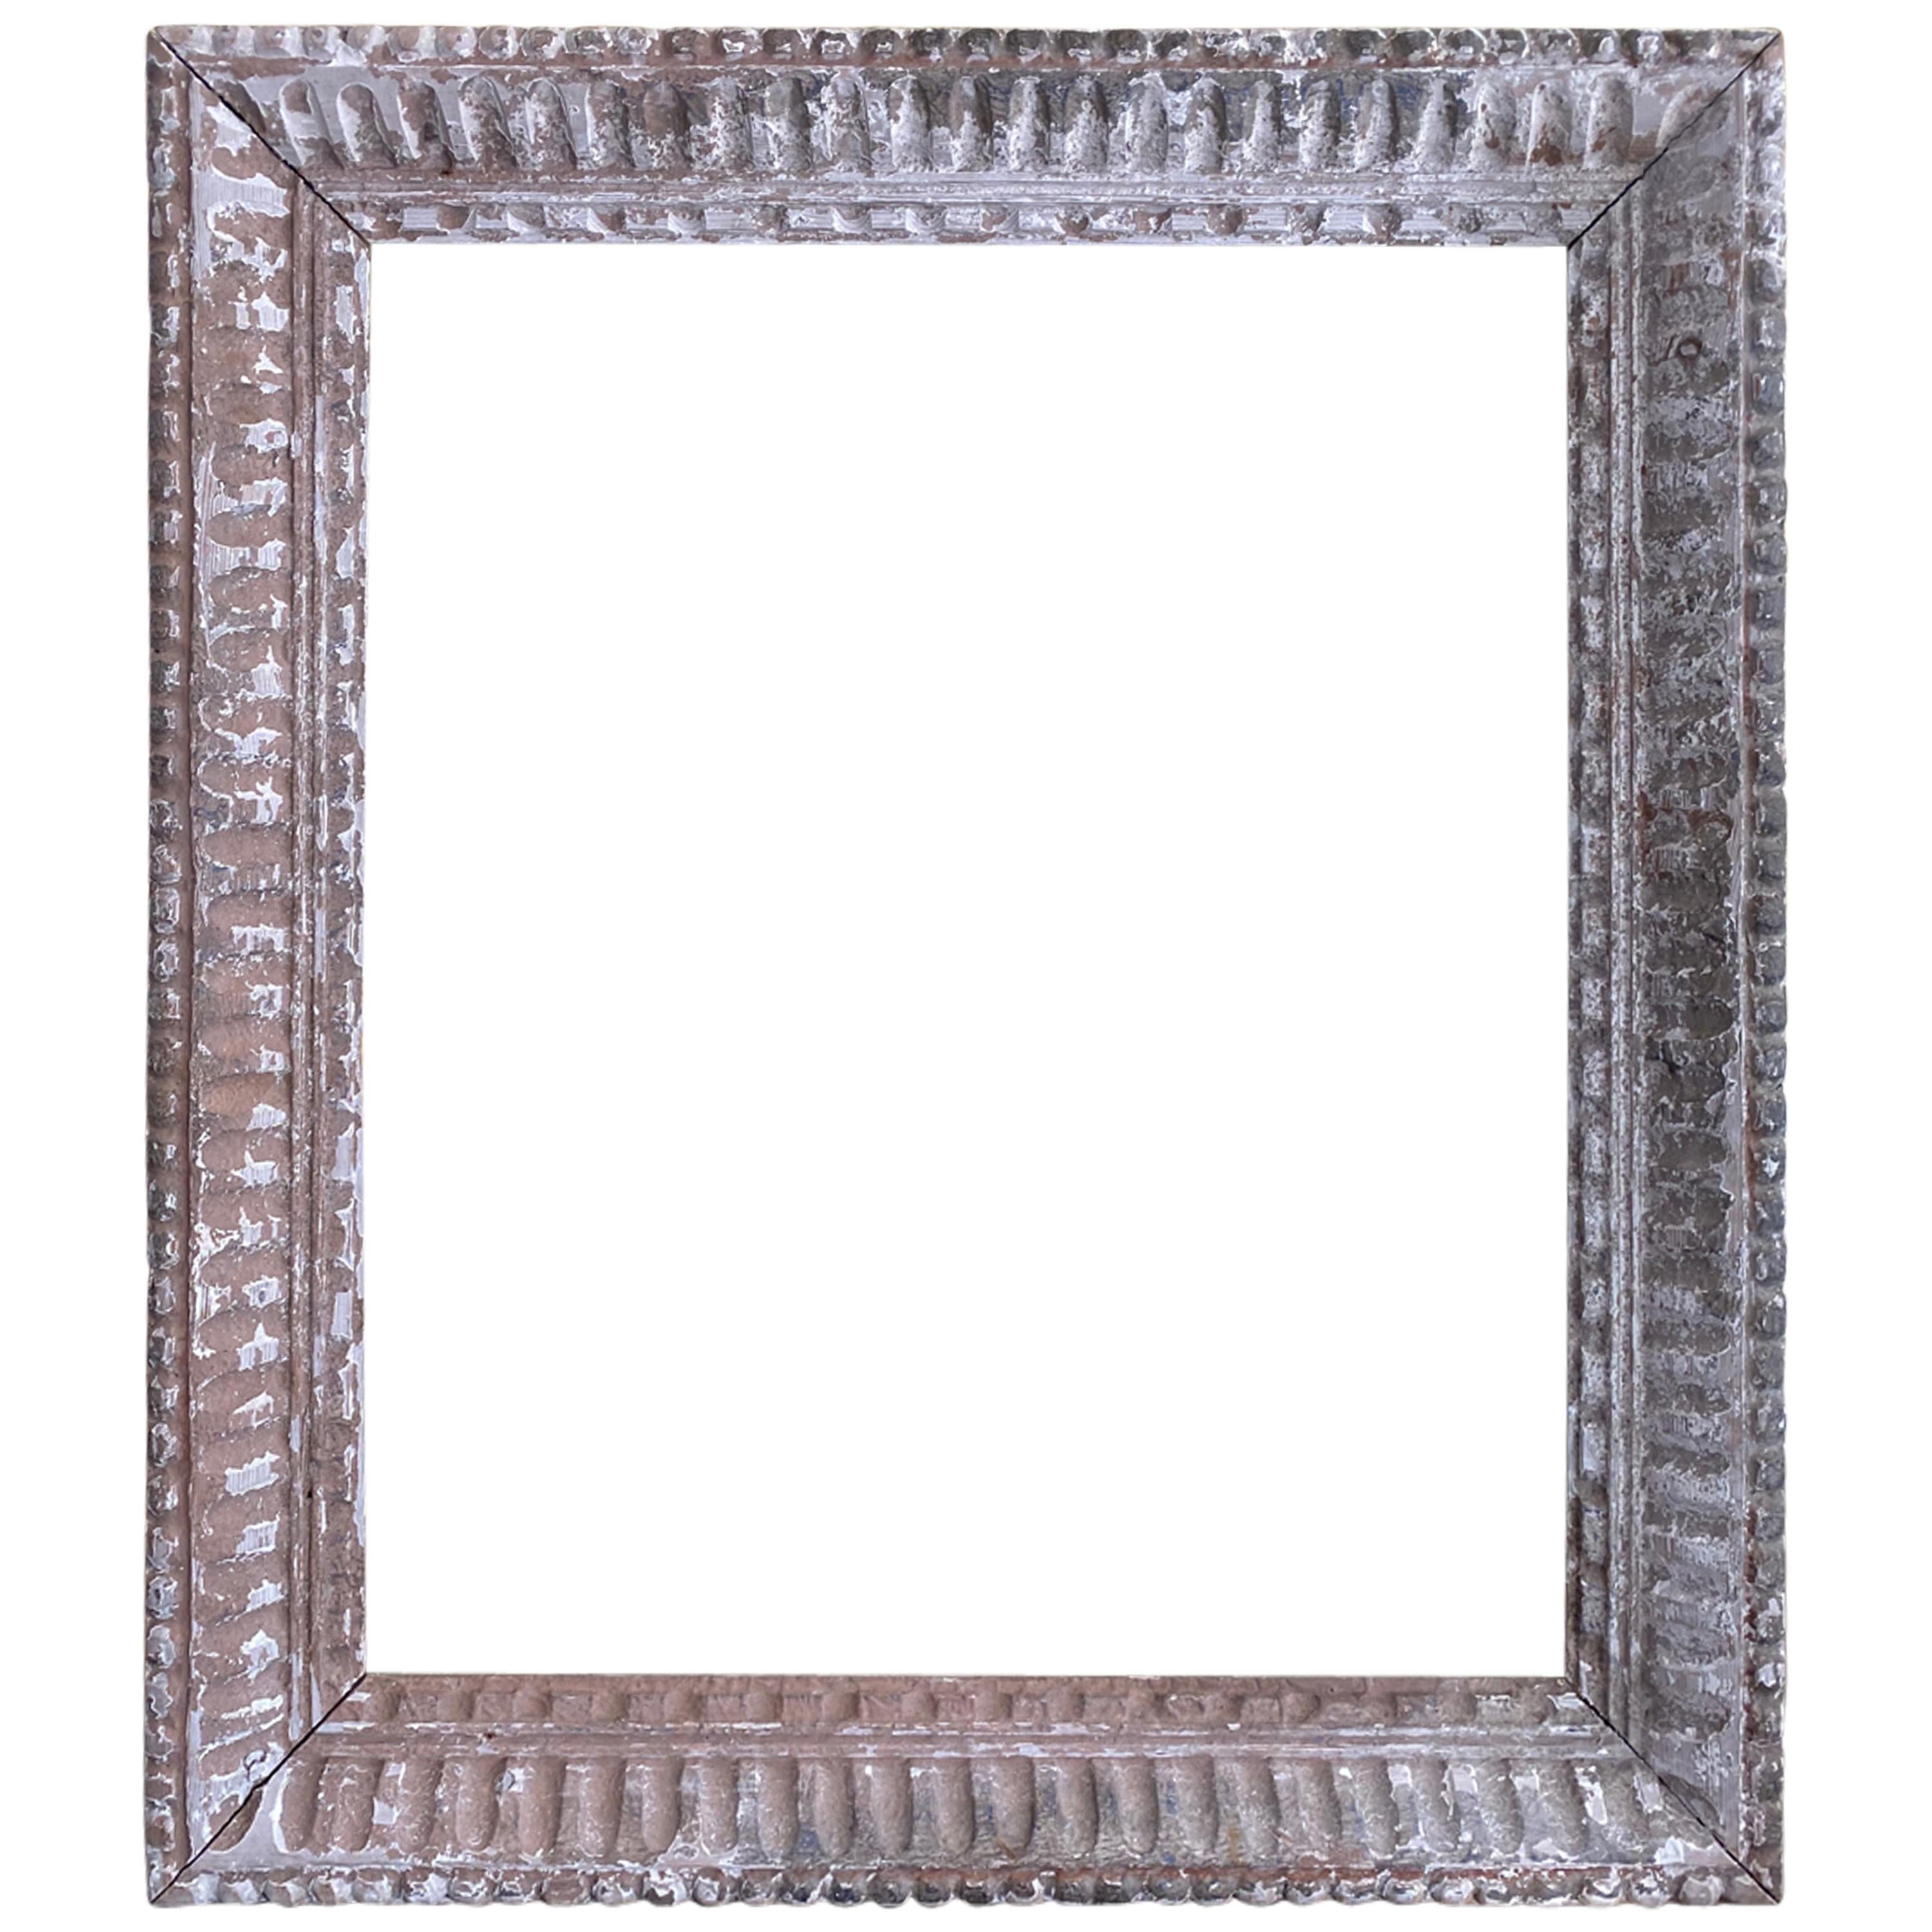 Antique Classical Style Picture Frame with Whitewash